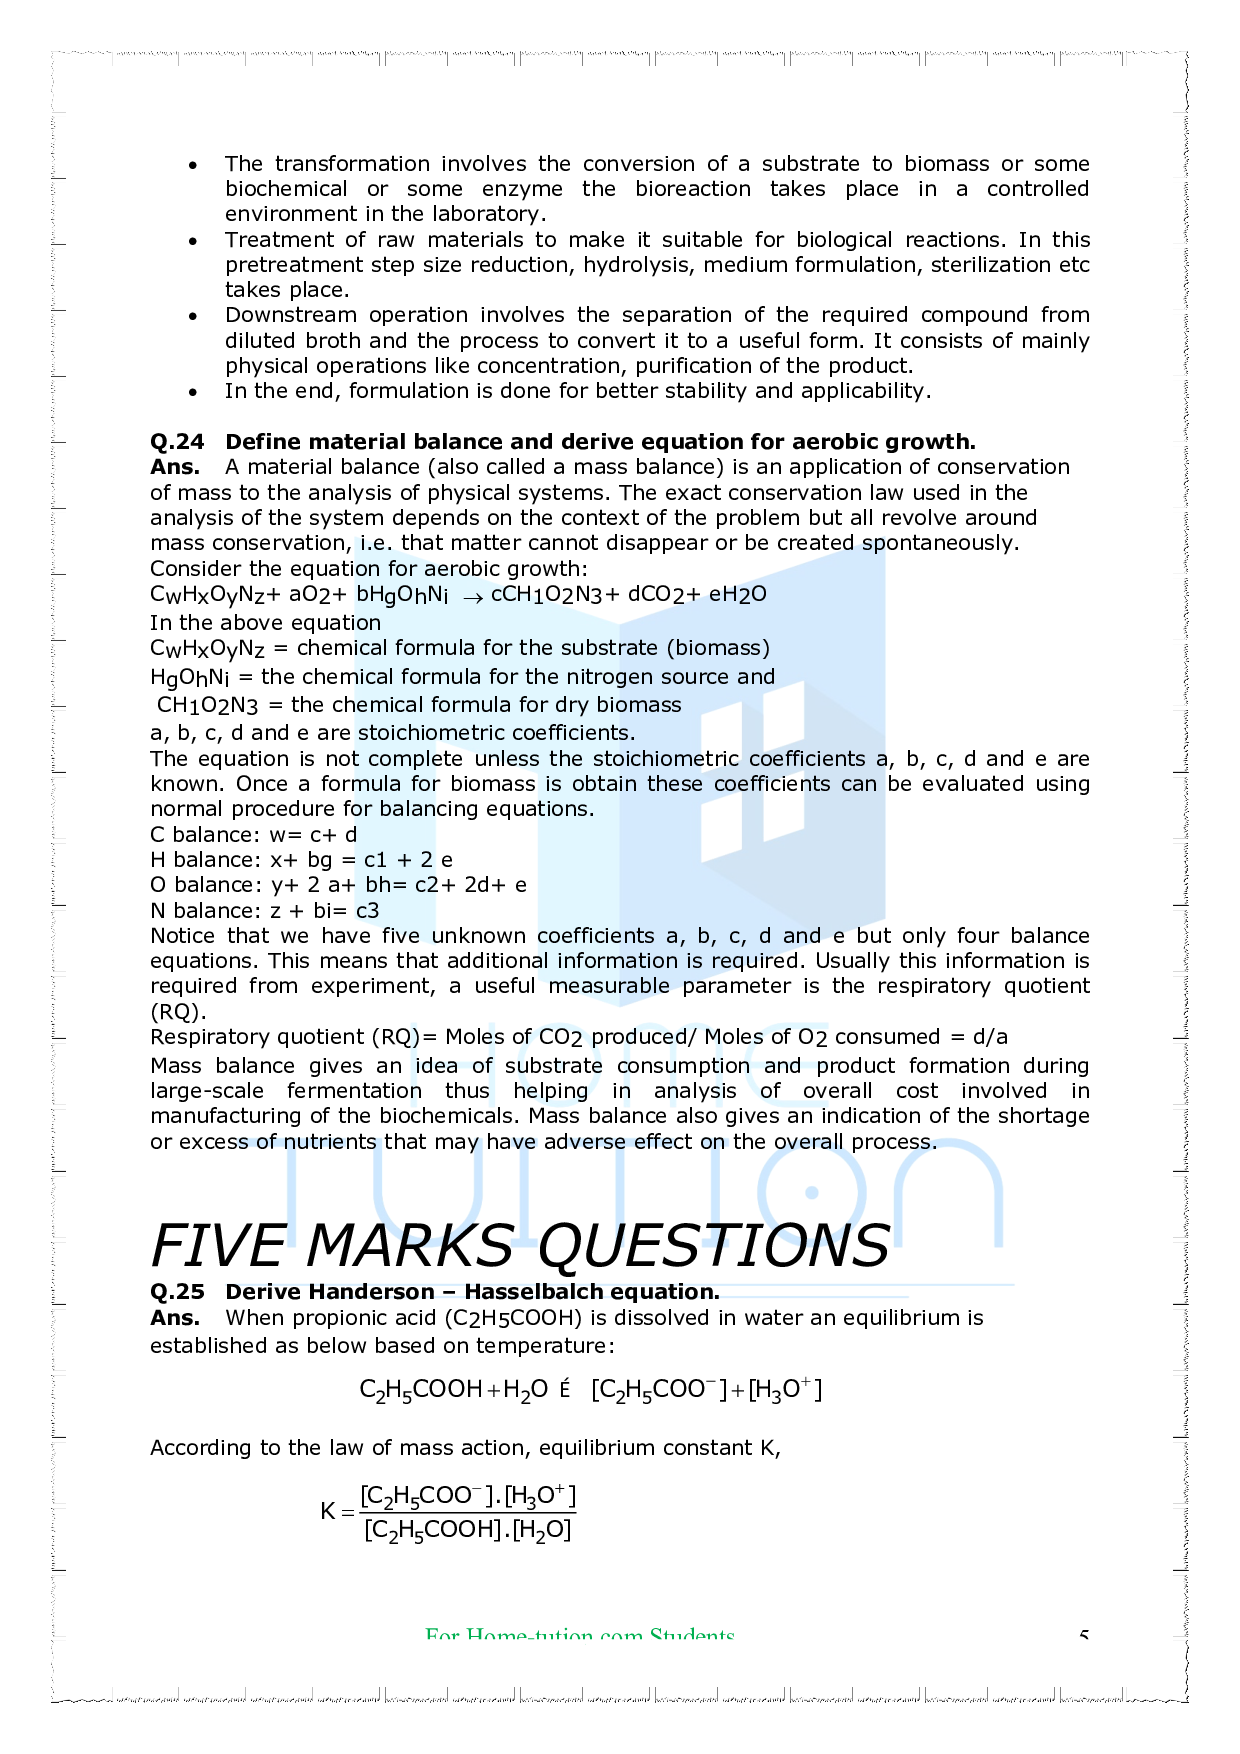 Chapter-Fundamentals of Biochemical engineering Questions